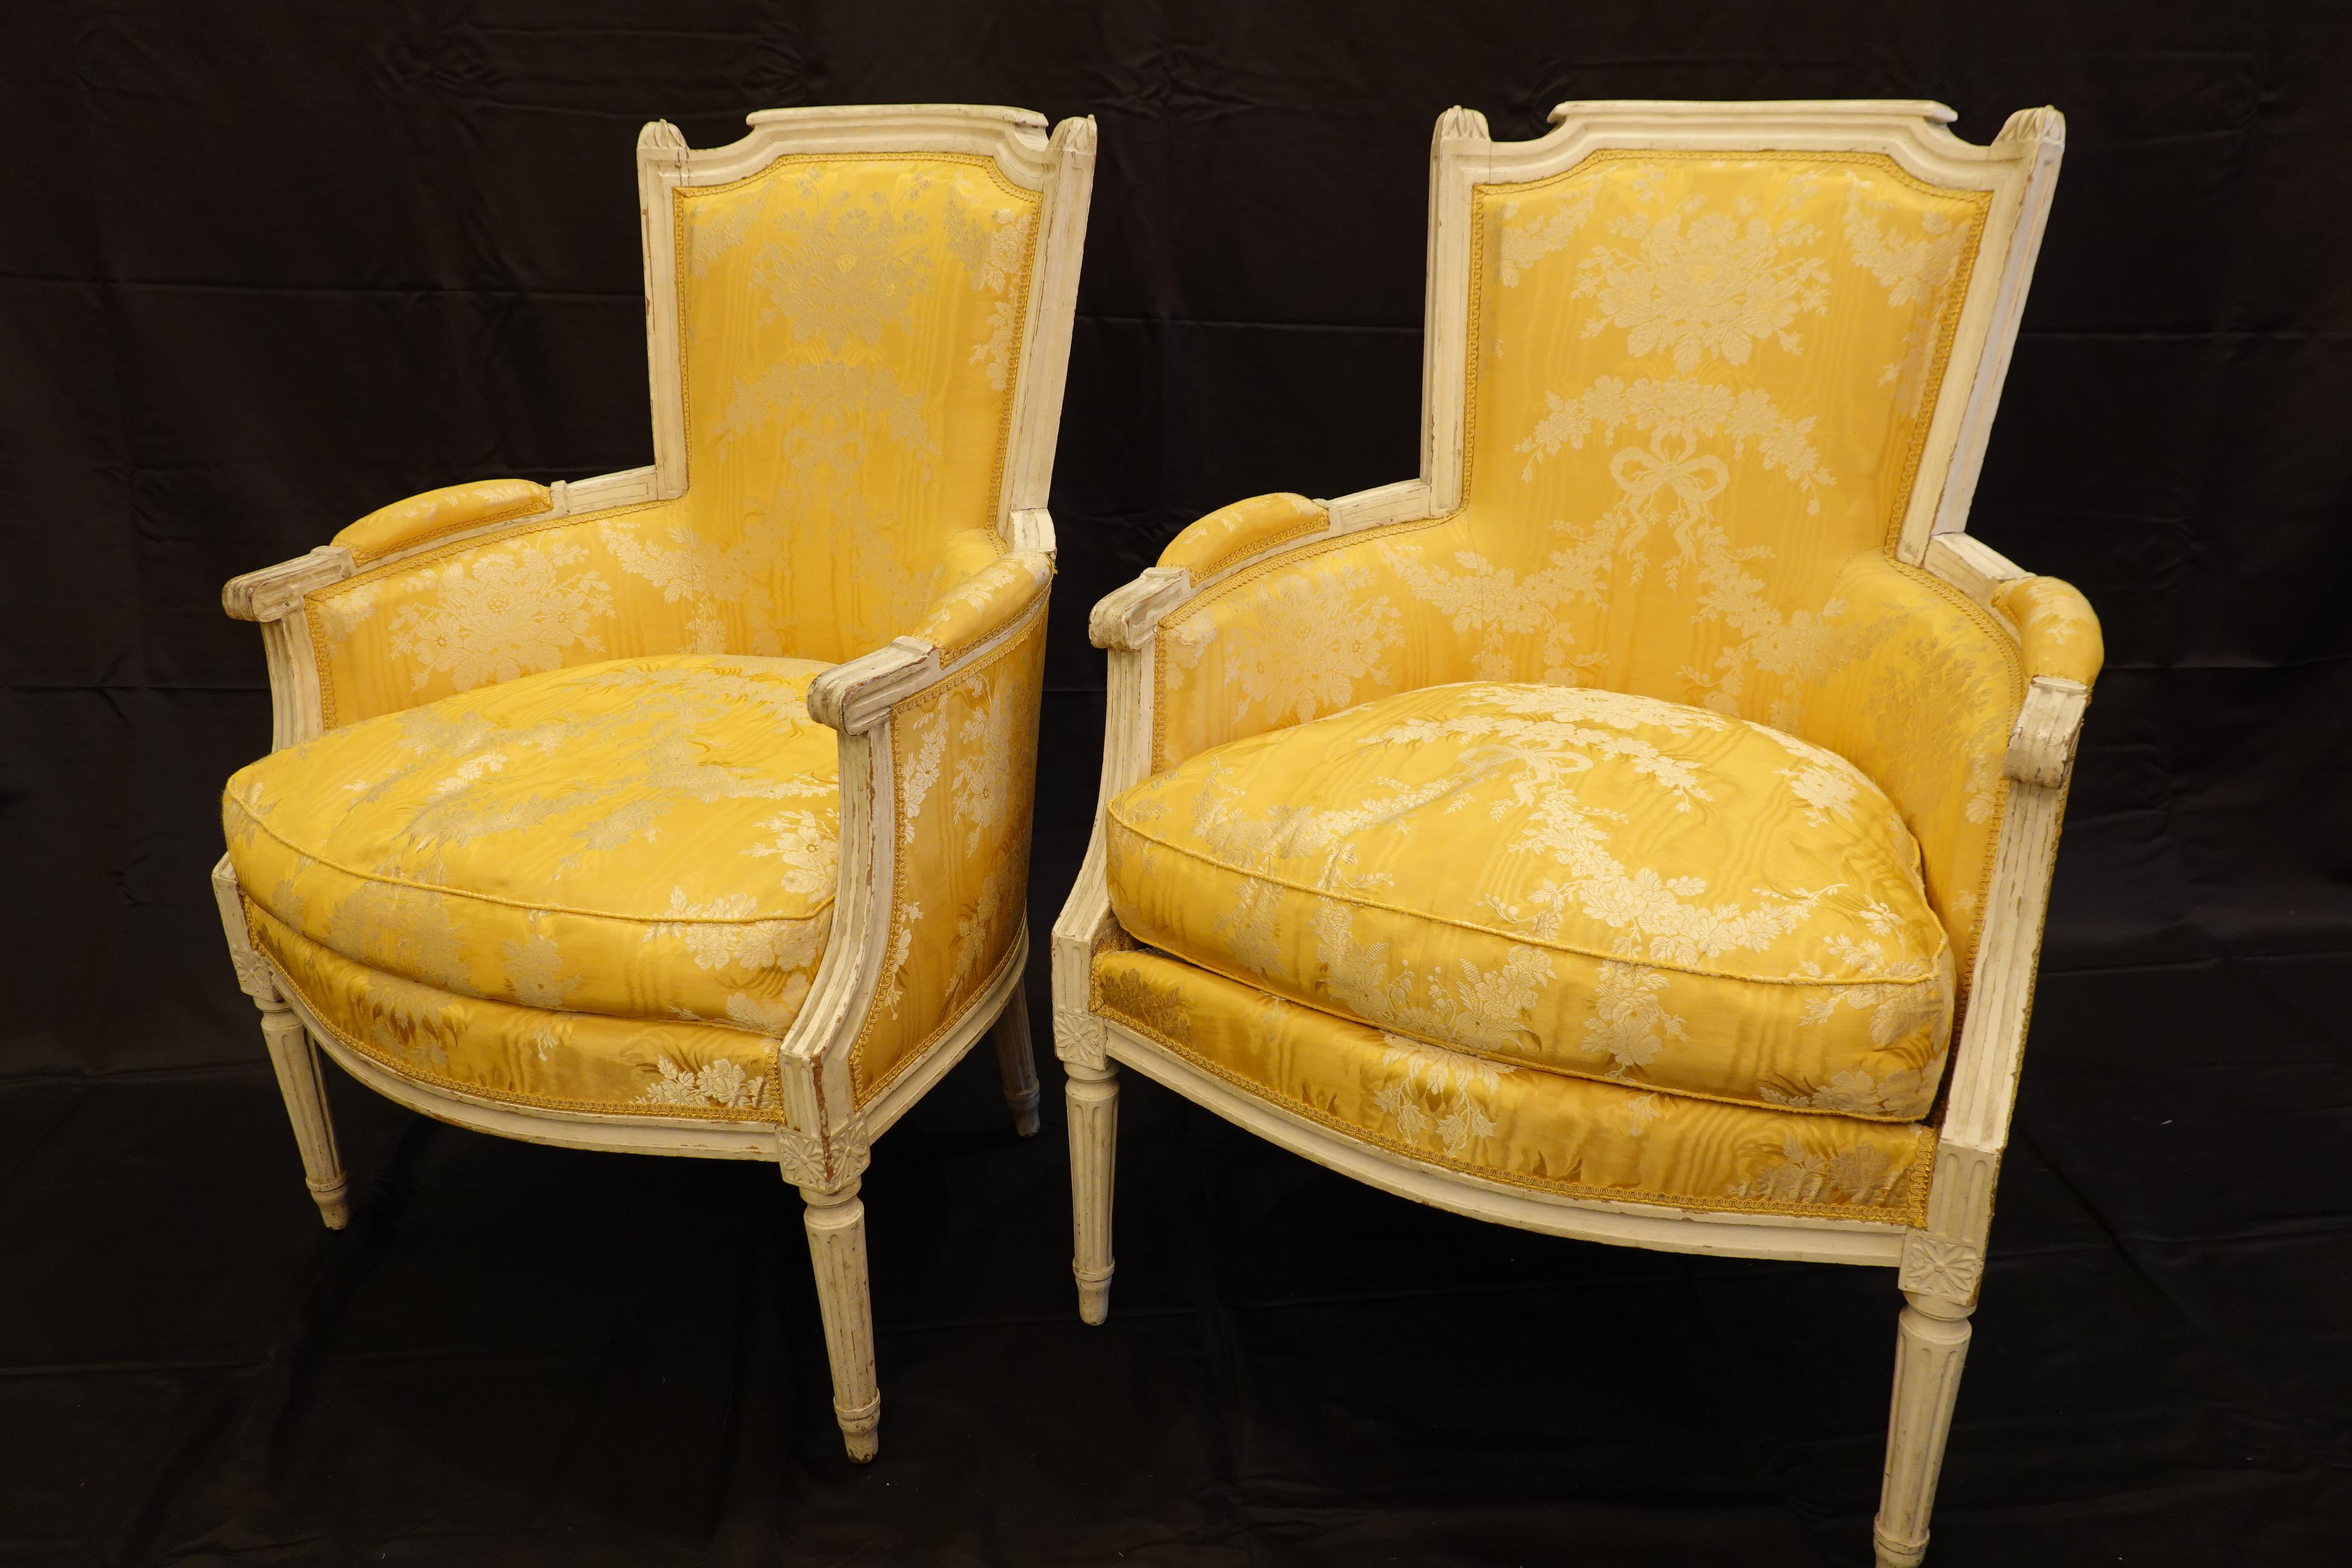 Pair of stunning French Louis XVI period bergères, upholstered in yellow silk lampas brocade fabric and gimp trim, with separate down-stuffed seat cushions (Circa 1790). The chair frames are white-painted, with 